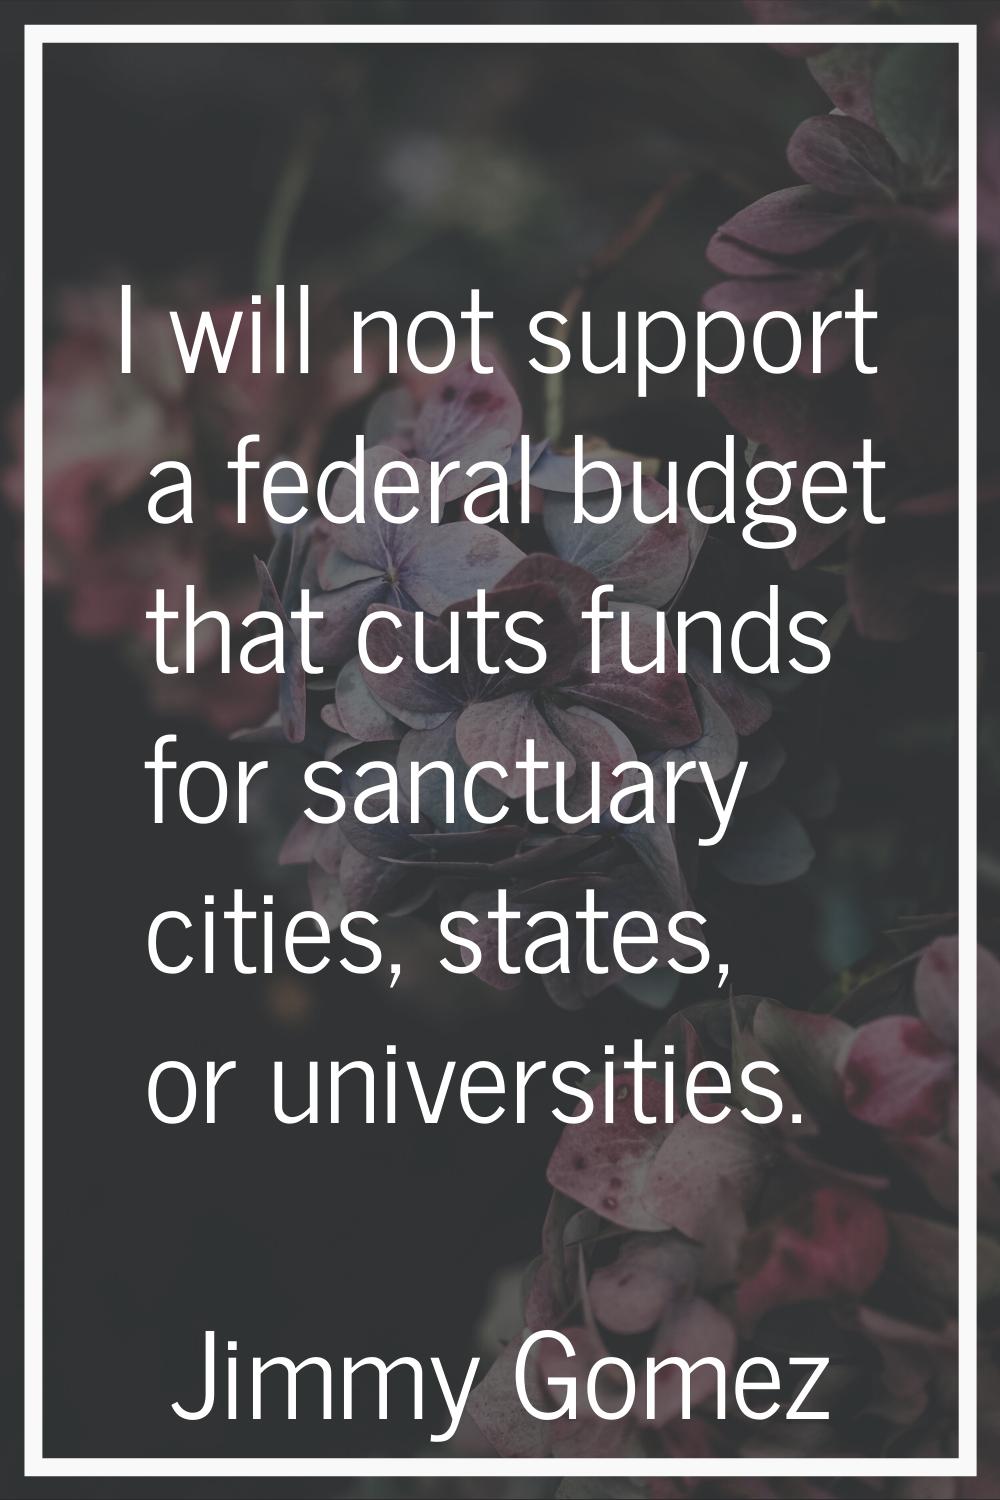 I will not support a federal budget that cuts funds for sanctuary cities, states, or universities.